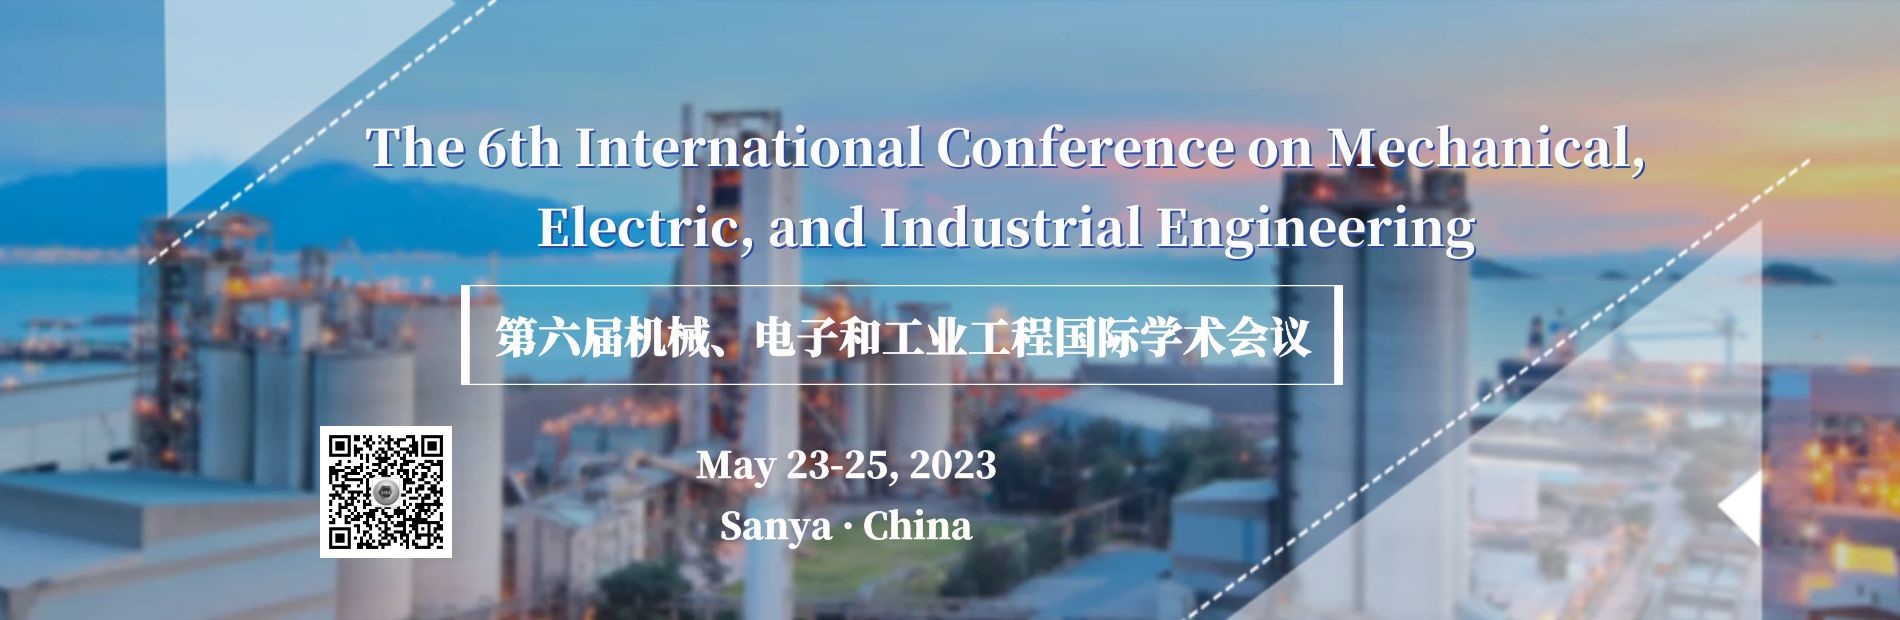 International Conference on Mechanical, Electronic and Industrial Engineering